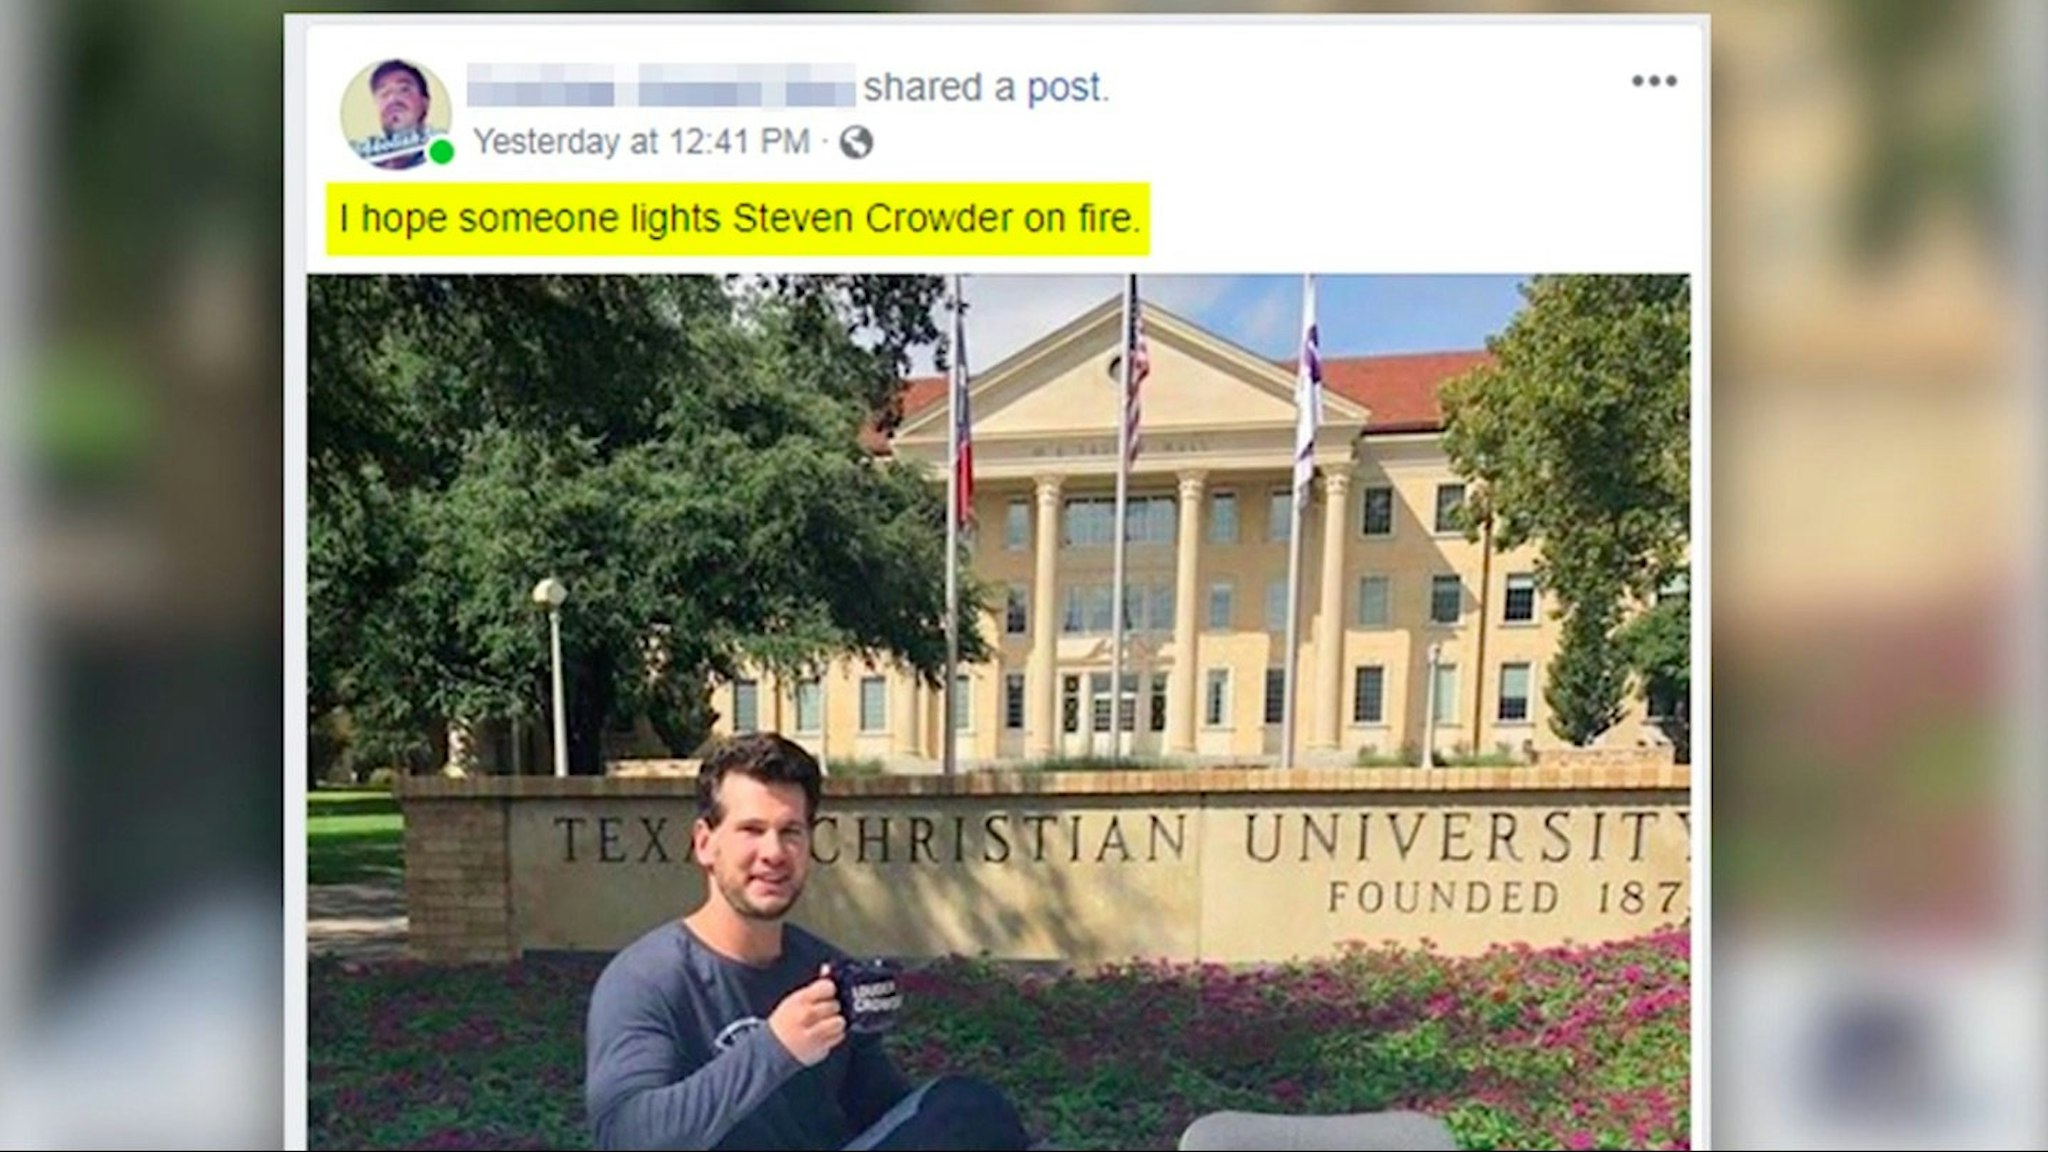 A post by an Antifa member calling for someone to light Steven Crowder on fire.